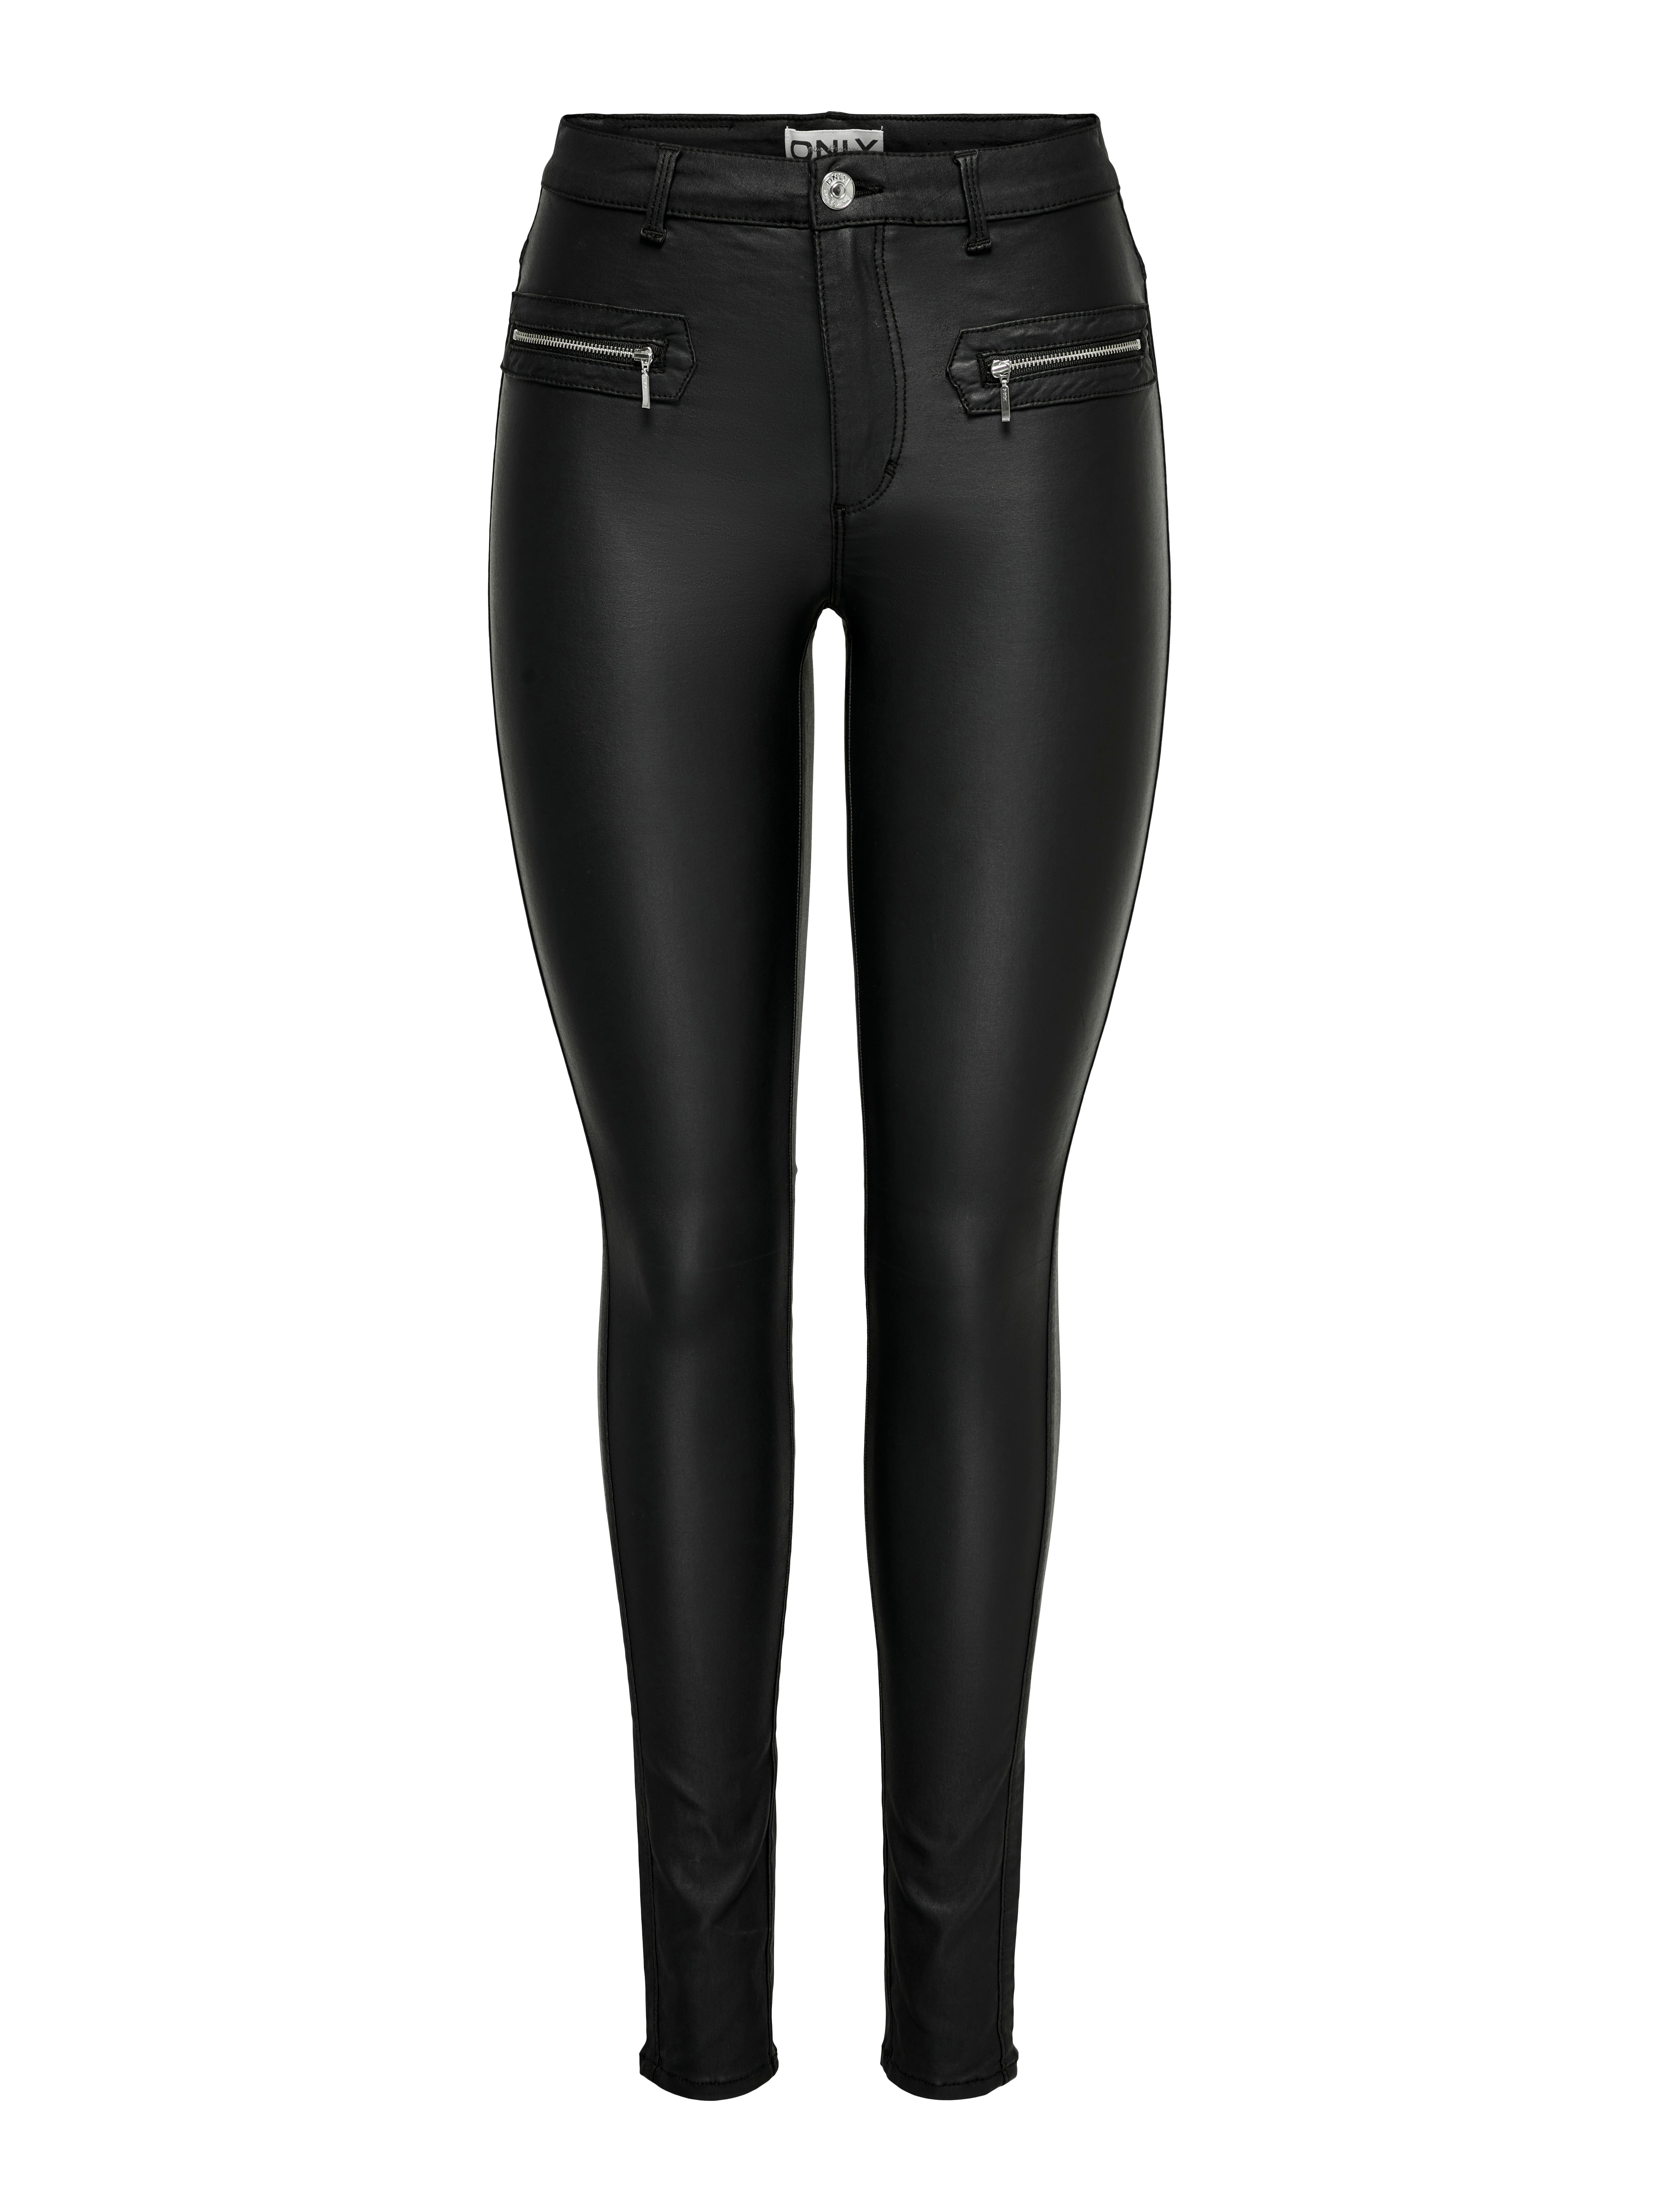 Buy Black Jersey Stretch Skinny Trousers (3-18yrs) from the Next UK online  shop